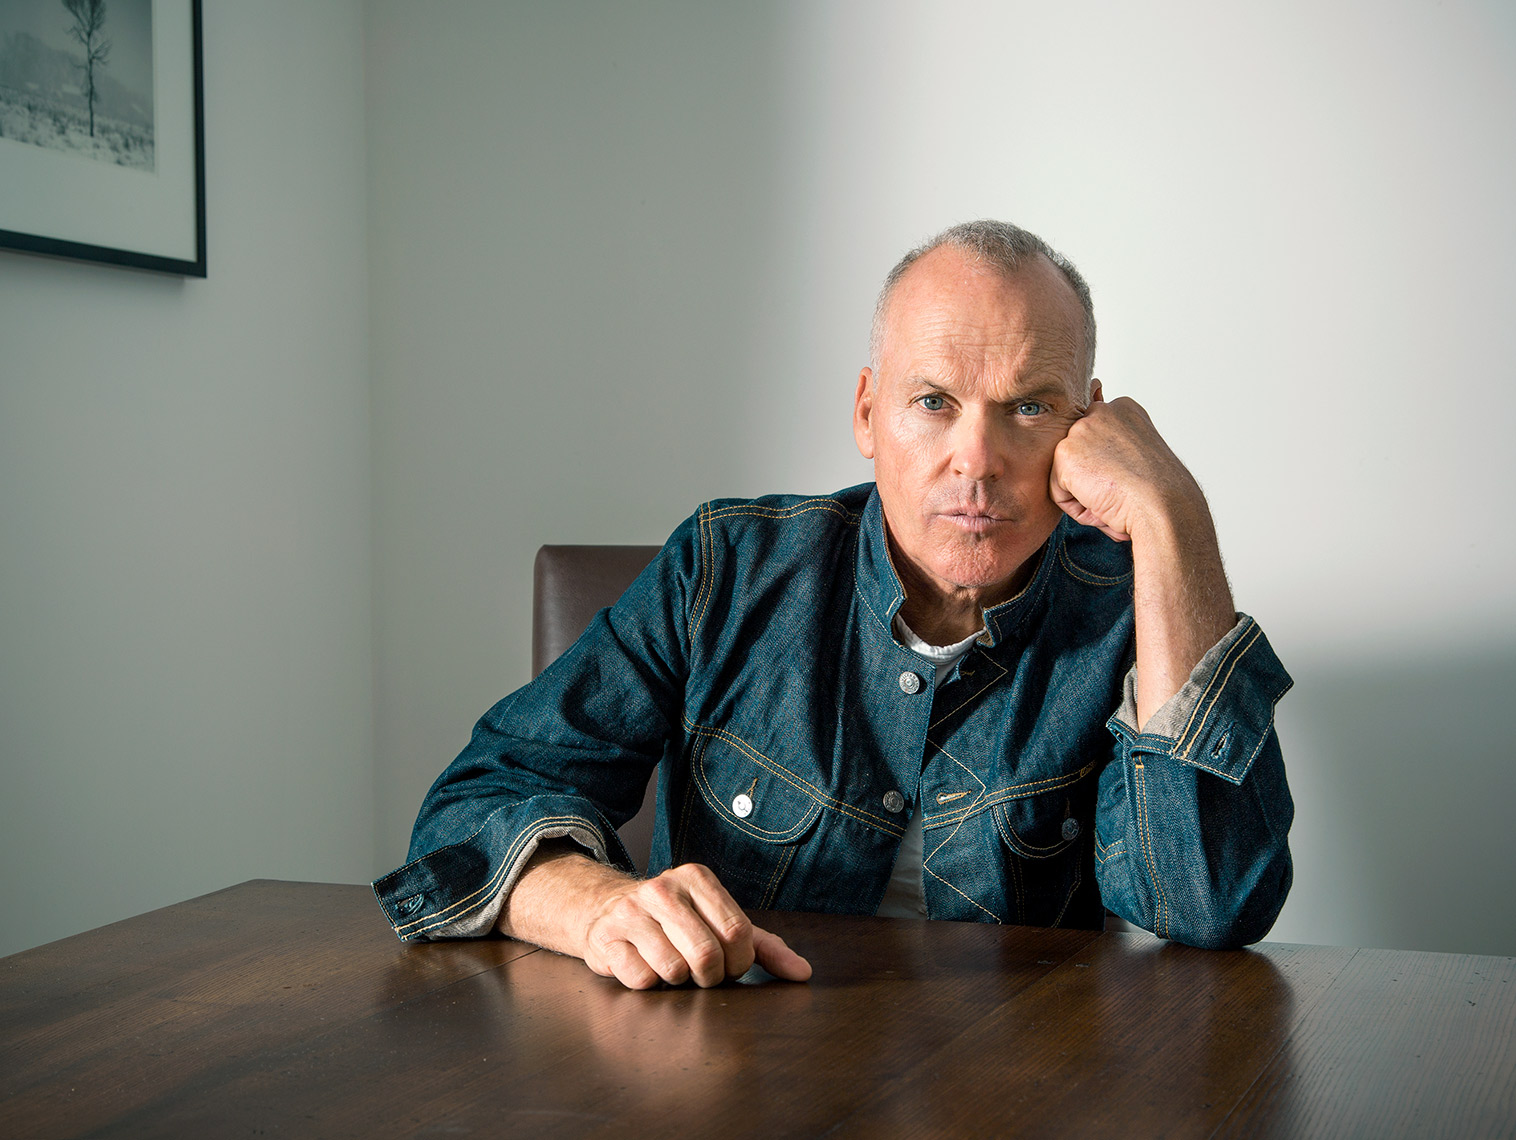 Michael Keaton photographed by Michael Lewis for the New York Times at his Pacific Palisades home on September 24th, 2014.